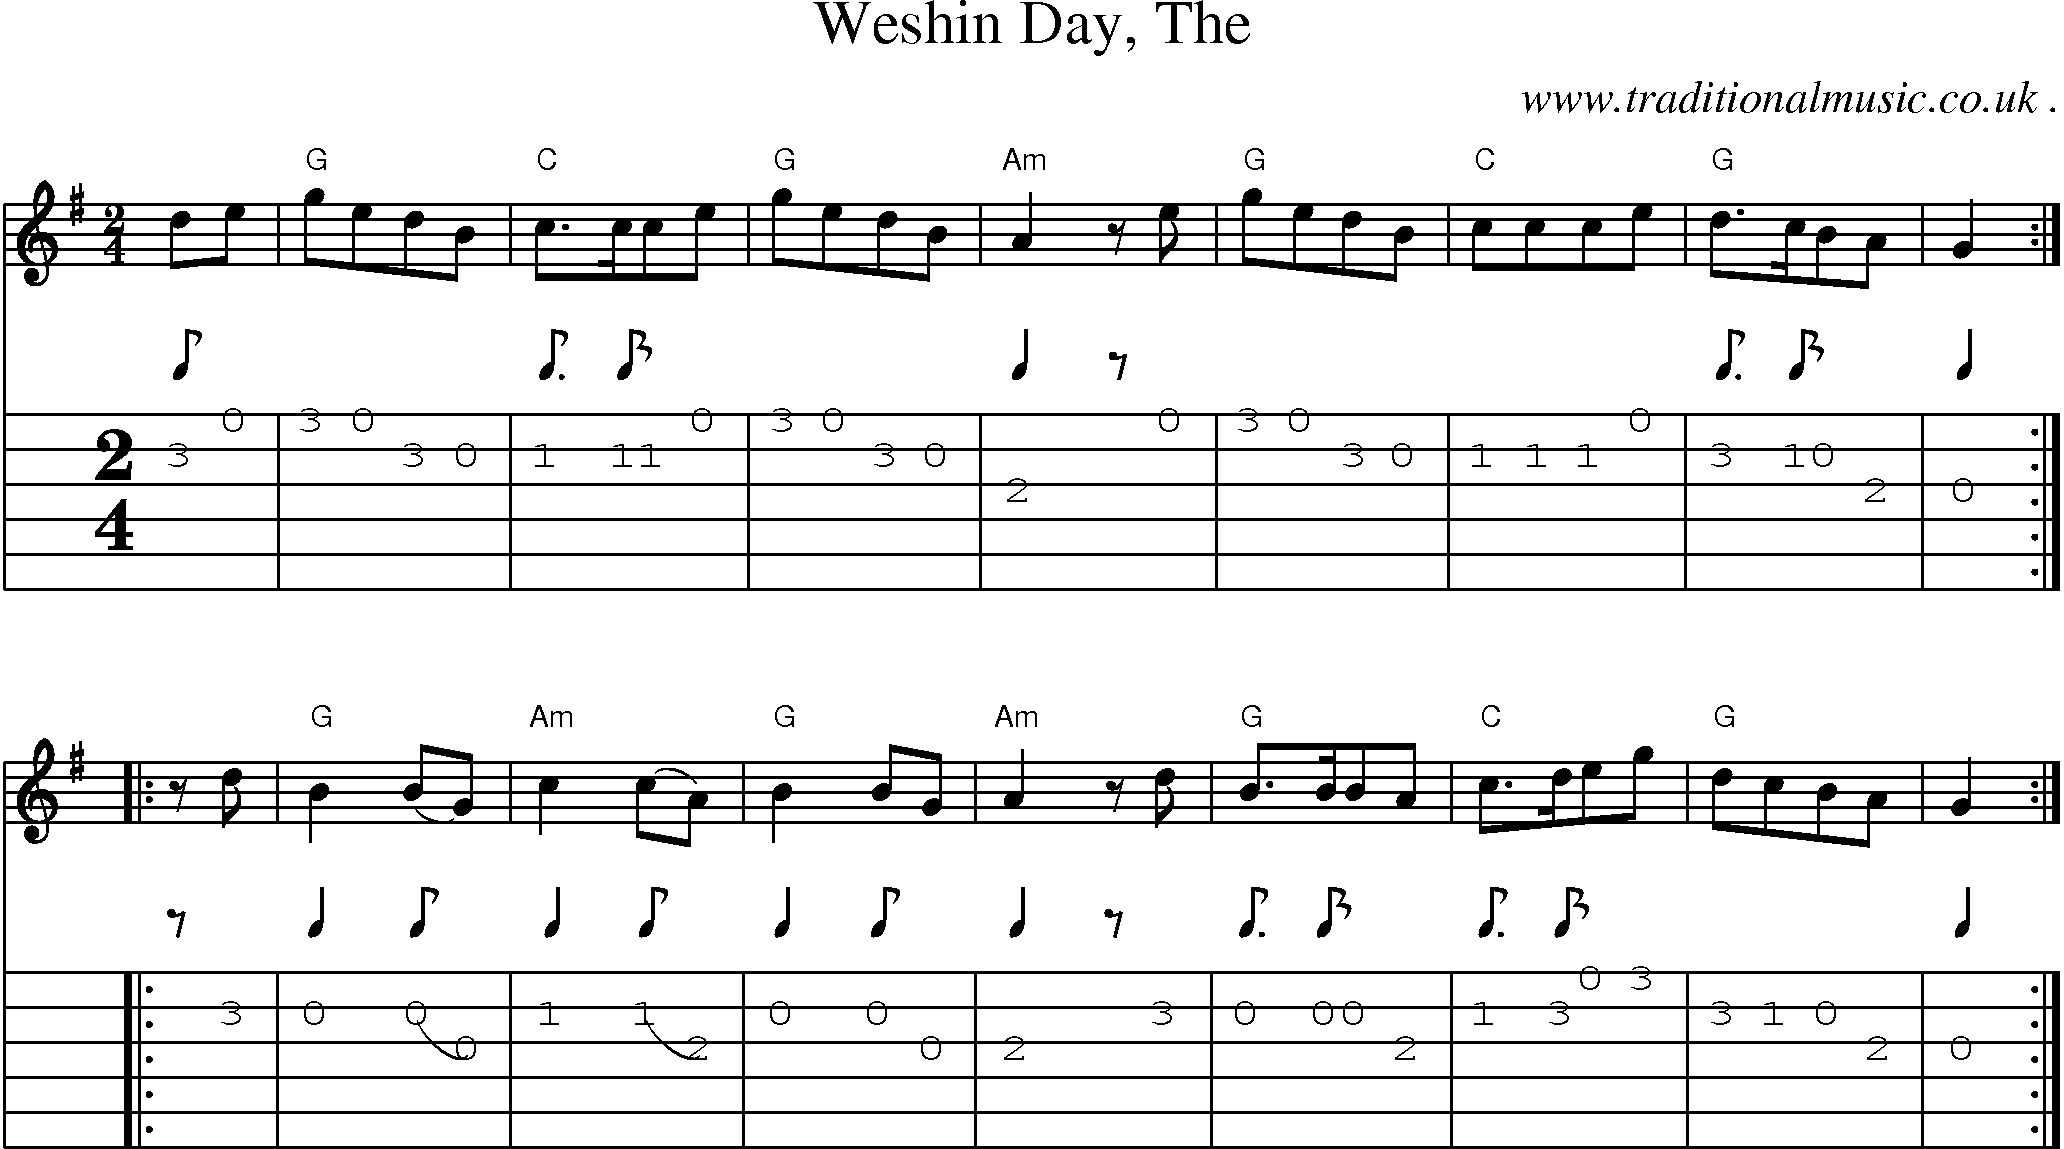 Music Score and Guitar Tabs for Weshin Day The